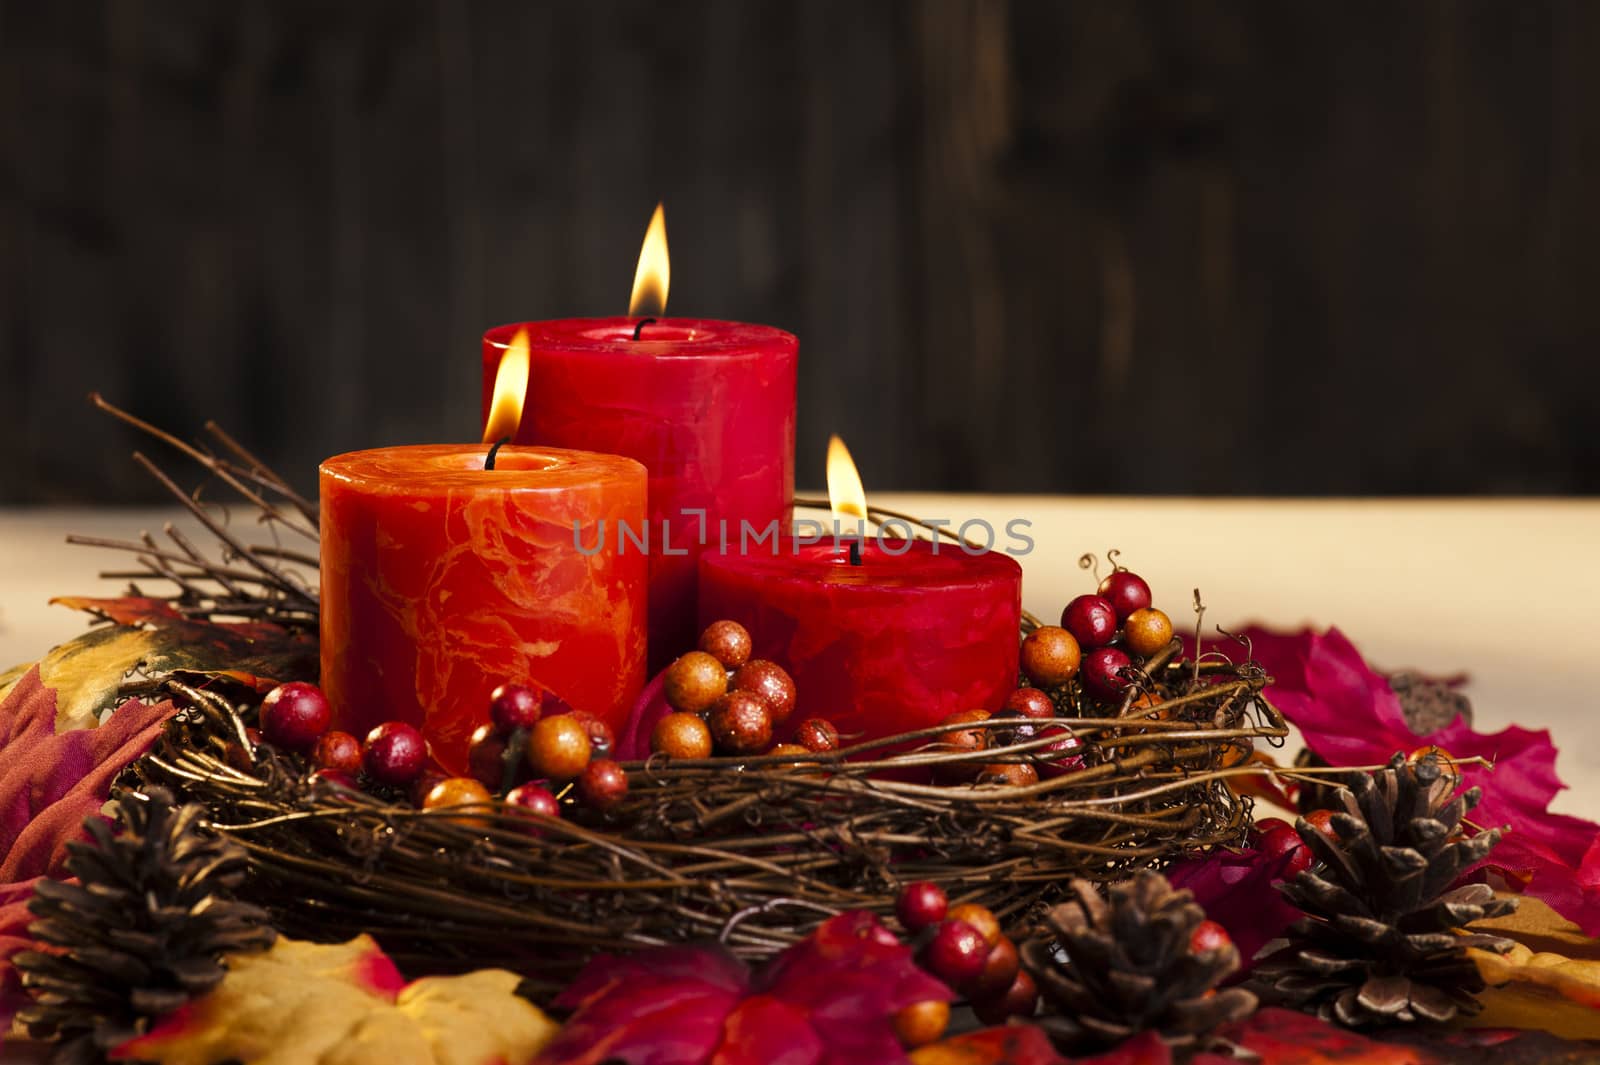 Candles in nice and beautiful colorful autumn leaves